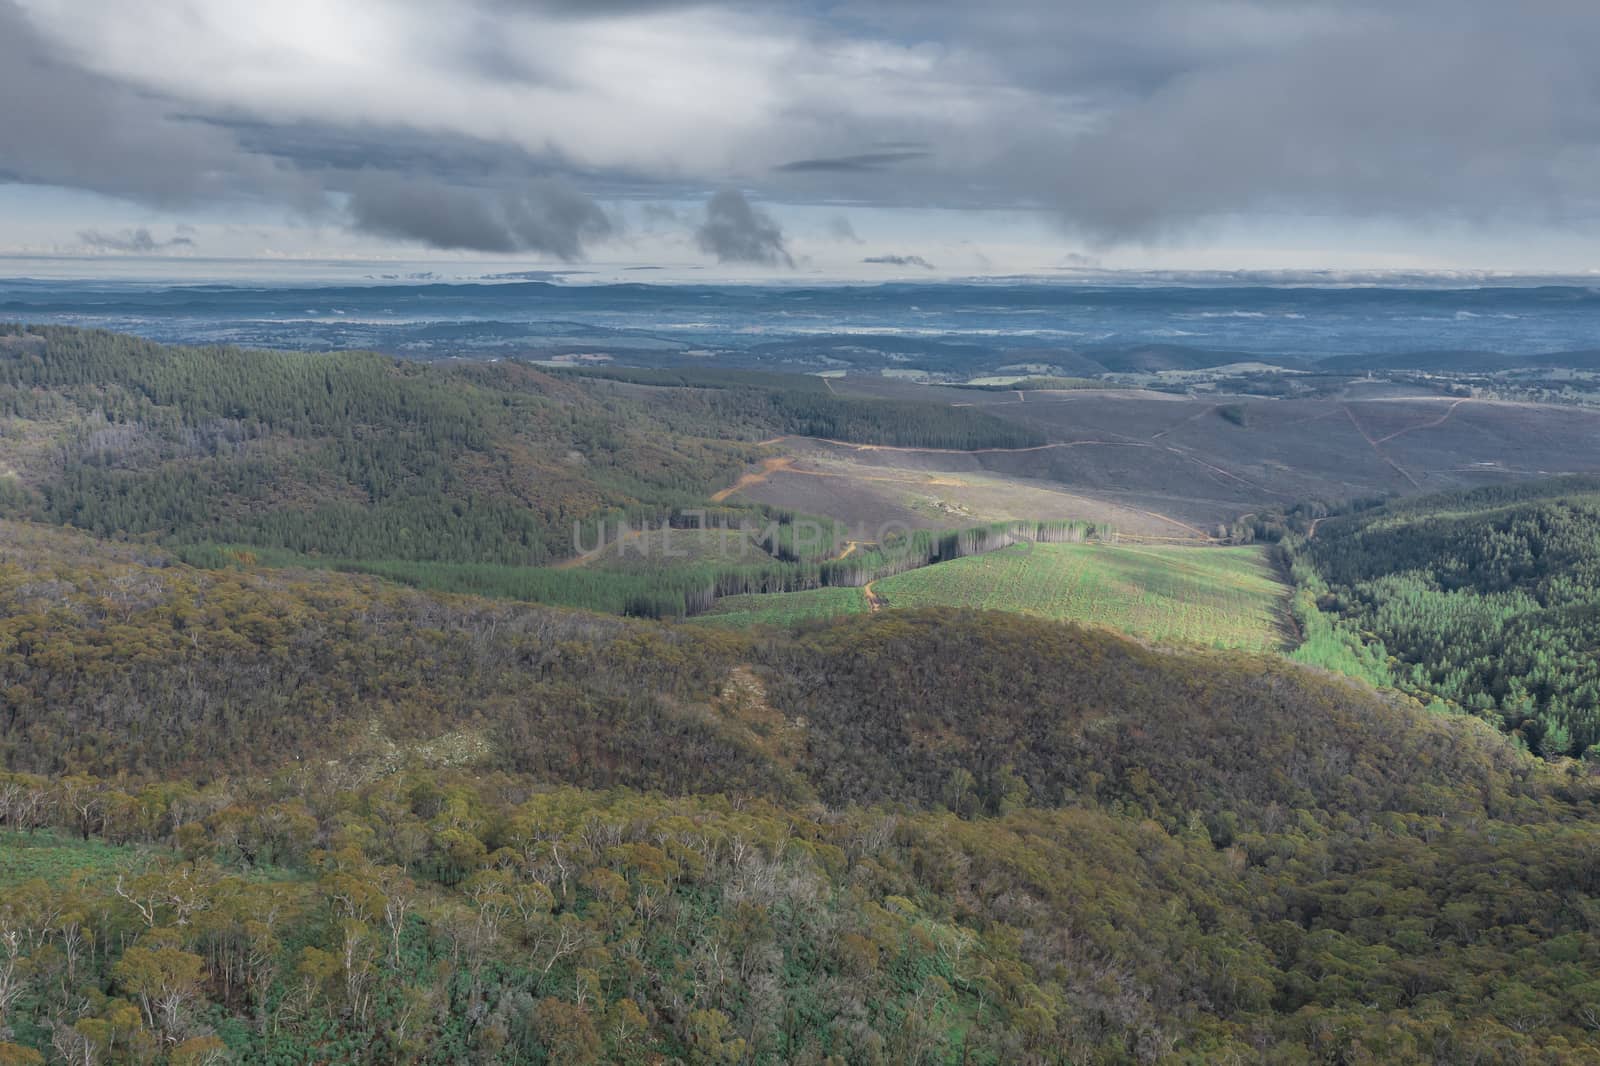 Aerial view from Mount Canobolas in regional Australia by WittkePhotos